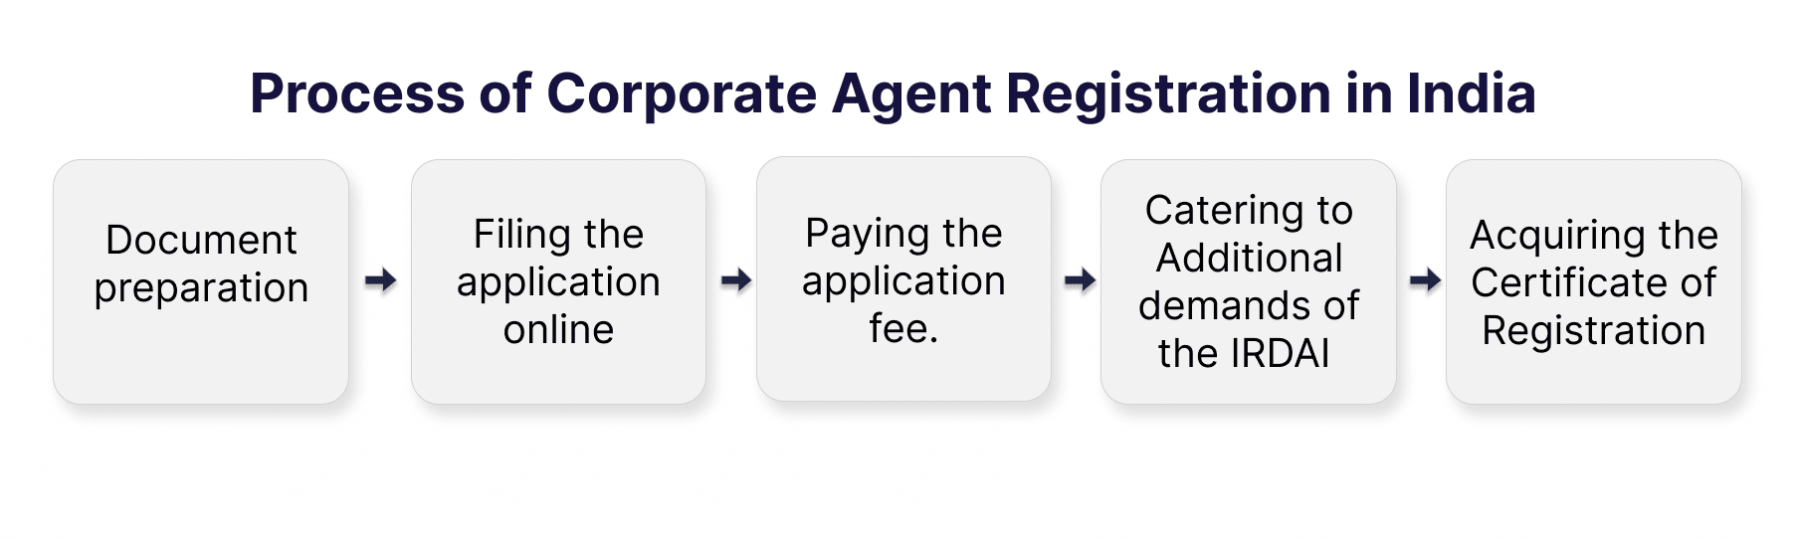 Process of Corporate Agent Registration in India